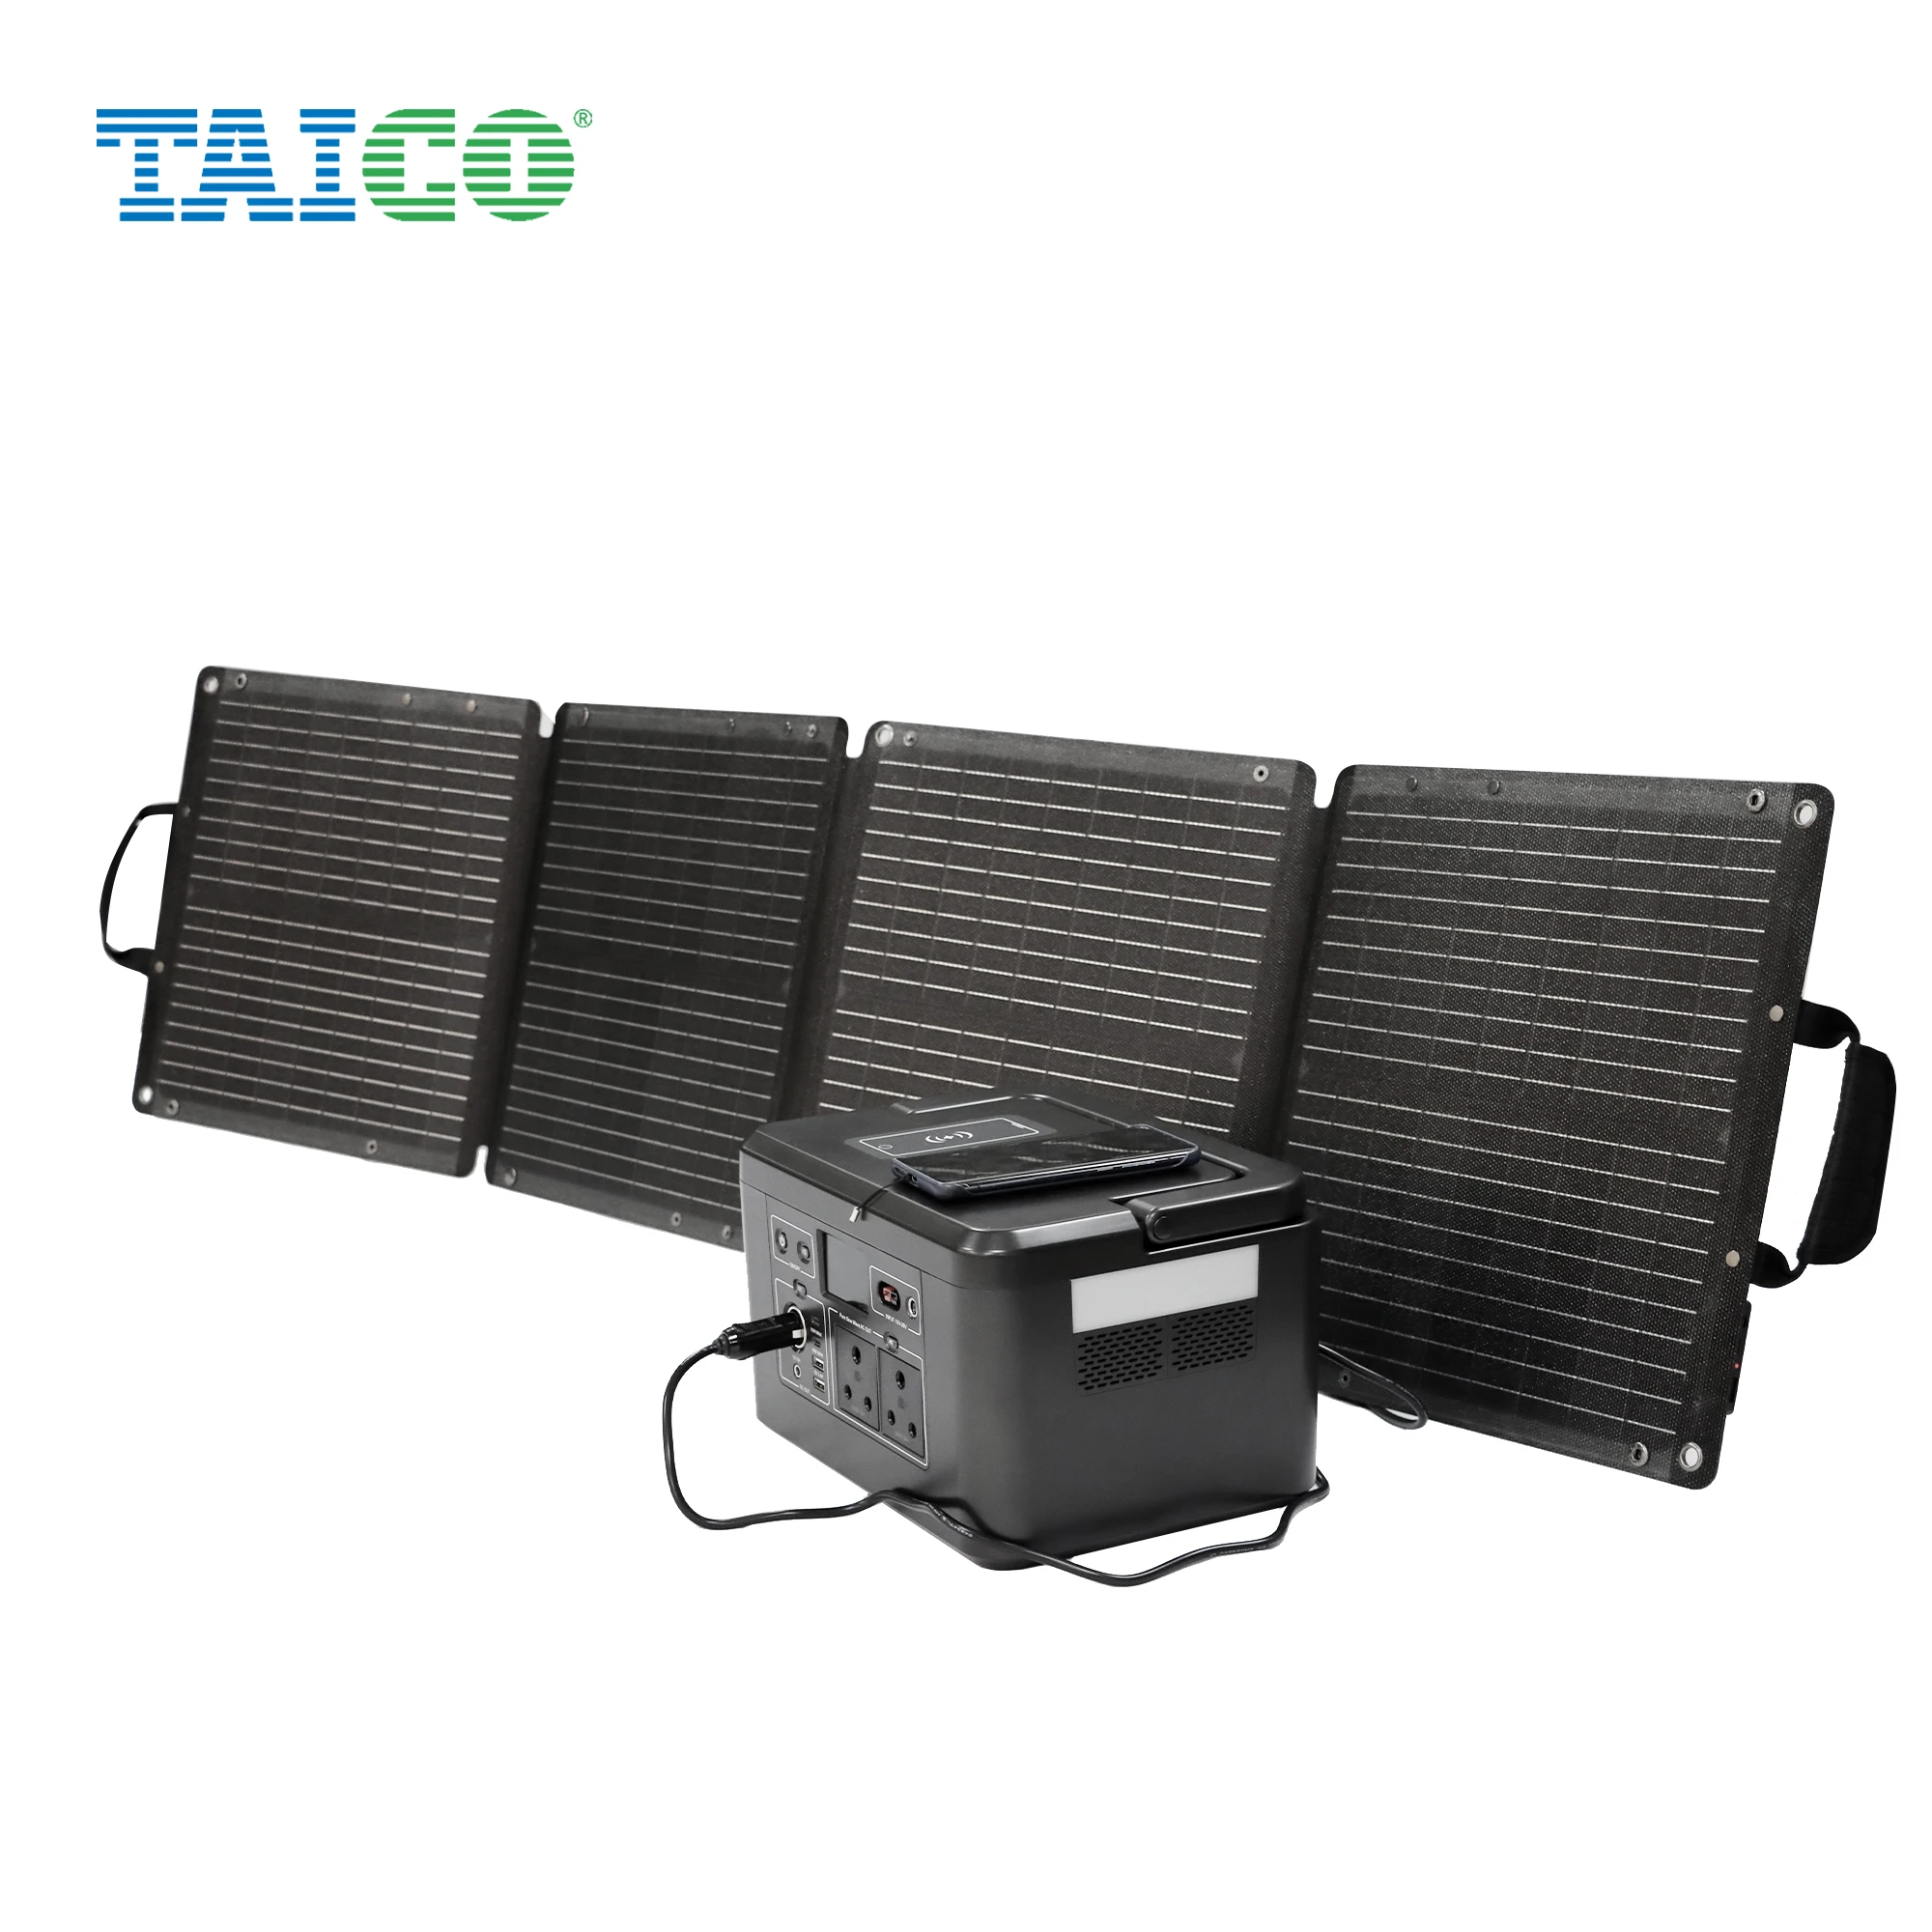 

TAICO Solar Energy Products 100W Portable Solar Panel Battery Charger Phone Laptop USB DC Outdoor Camping Foldable Solar Panel